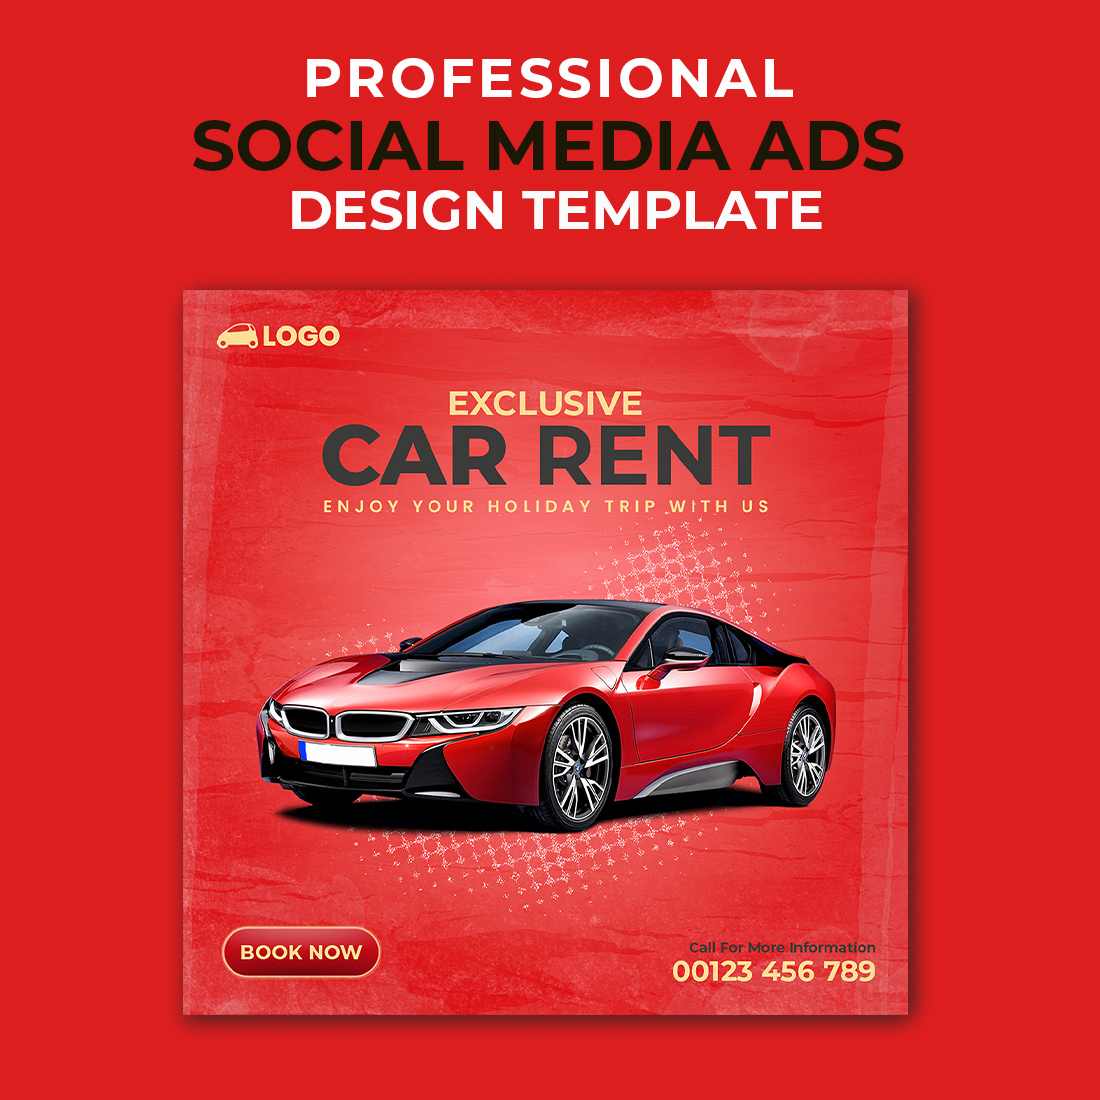 Professional & Creative Car Rent Social Media Ads Design Banner Template cover image.